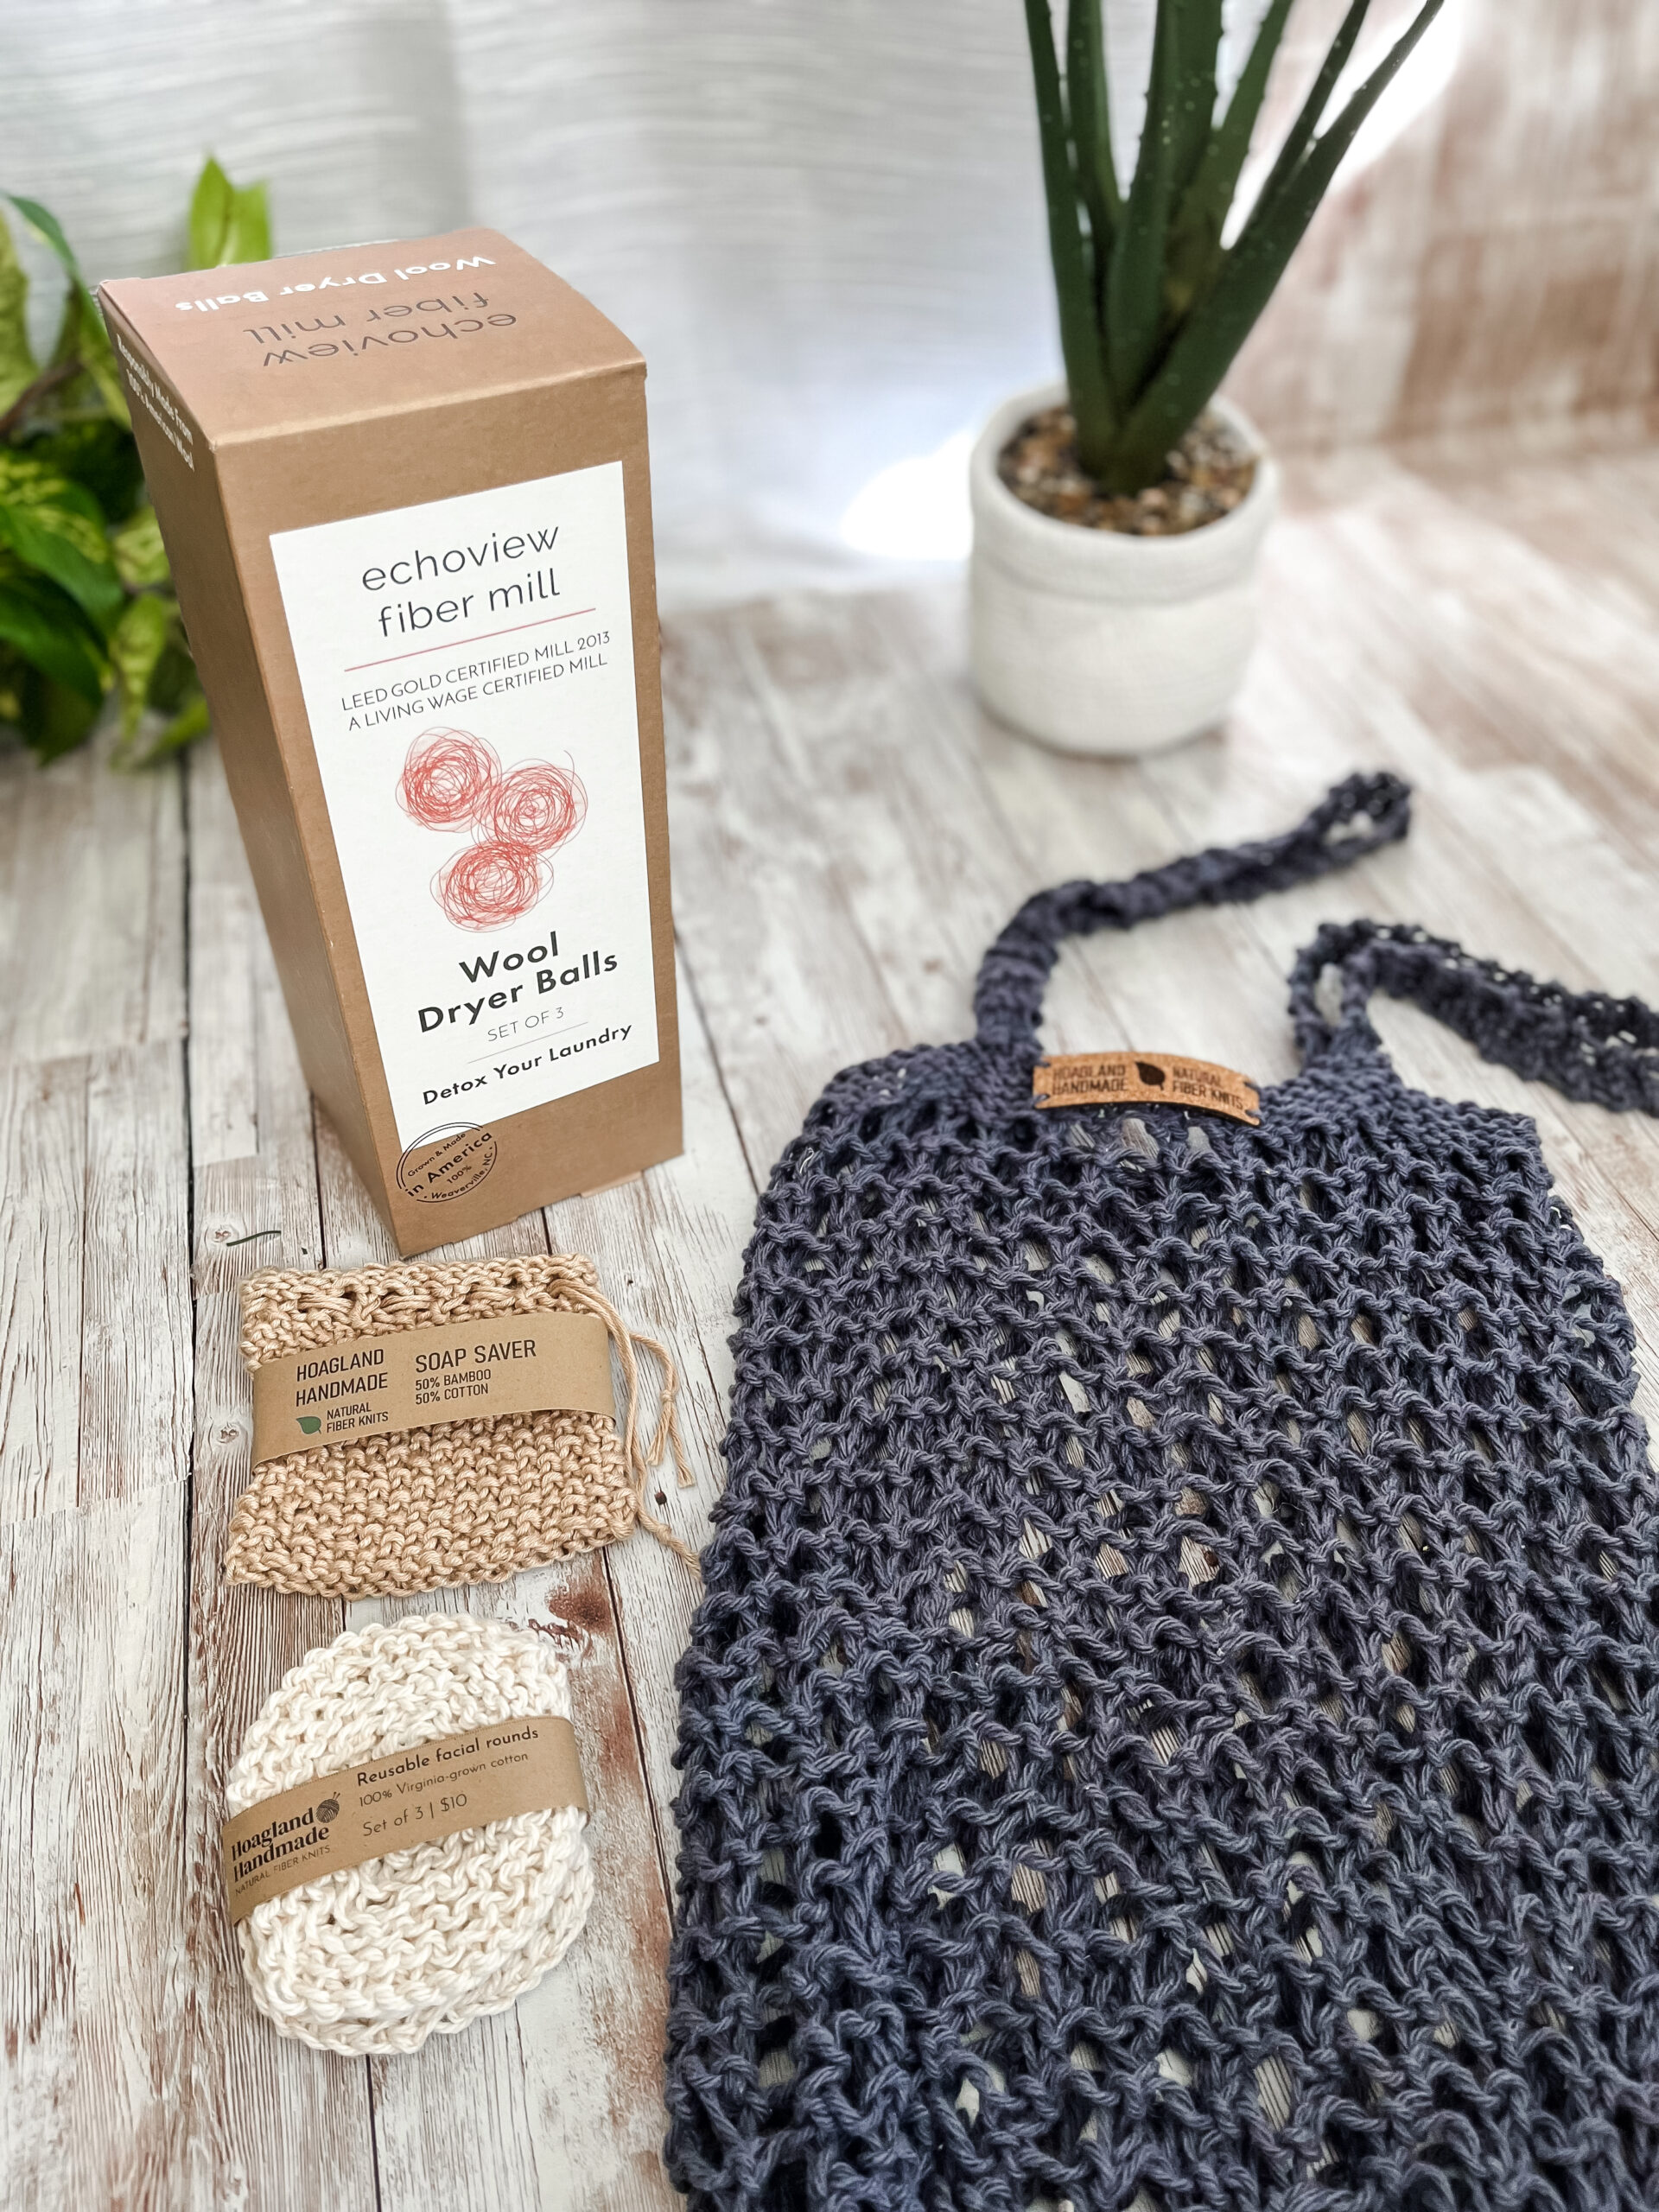 The Zero Waste gift set is pictured showing a box of 3 US Wool dryer balls, a tan bamboo/cotton soap saver pouch wrapped in a kraft paper label from Hoagland Handmade, a set of 3 usable facial rounds knit from Virginia-grown cotton and wrapped in a a kraft paper label from Hoagland Handmade, and a dark blue recycled cotton knit market tote